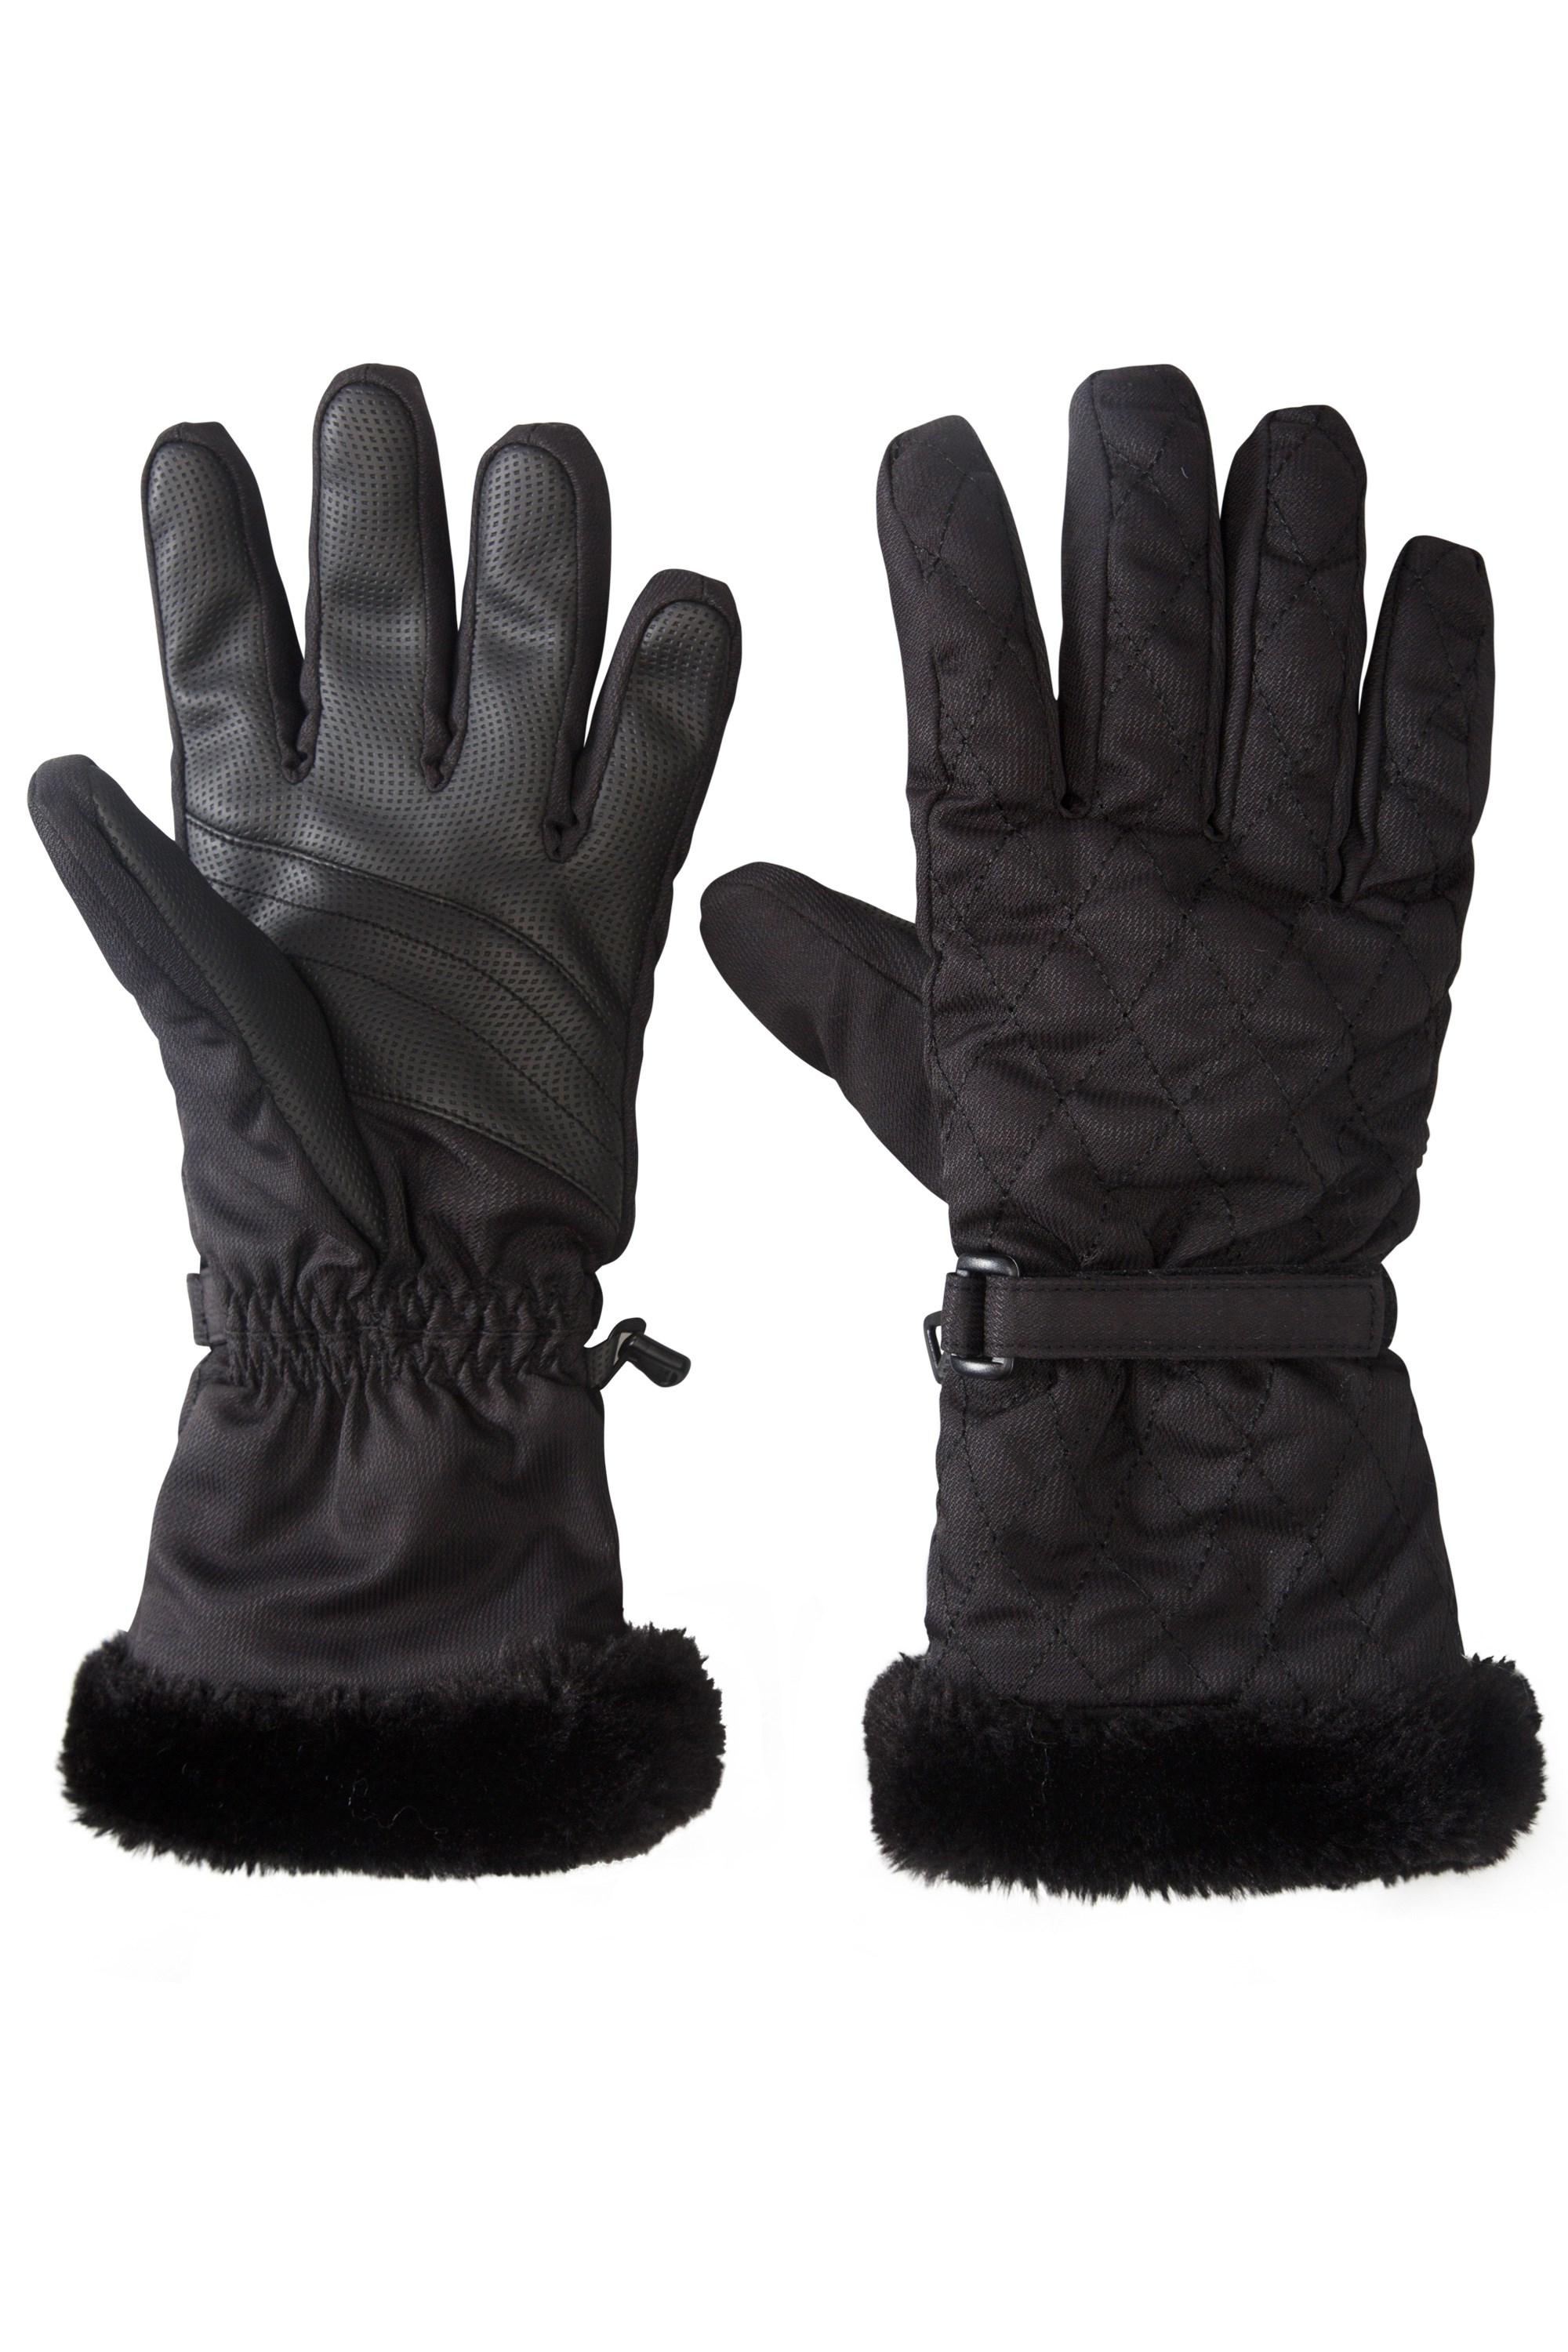 Quilted Womens Ski Gloves - Black